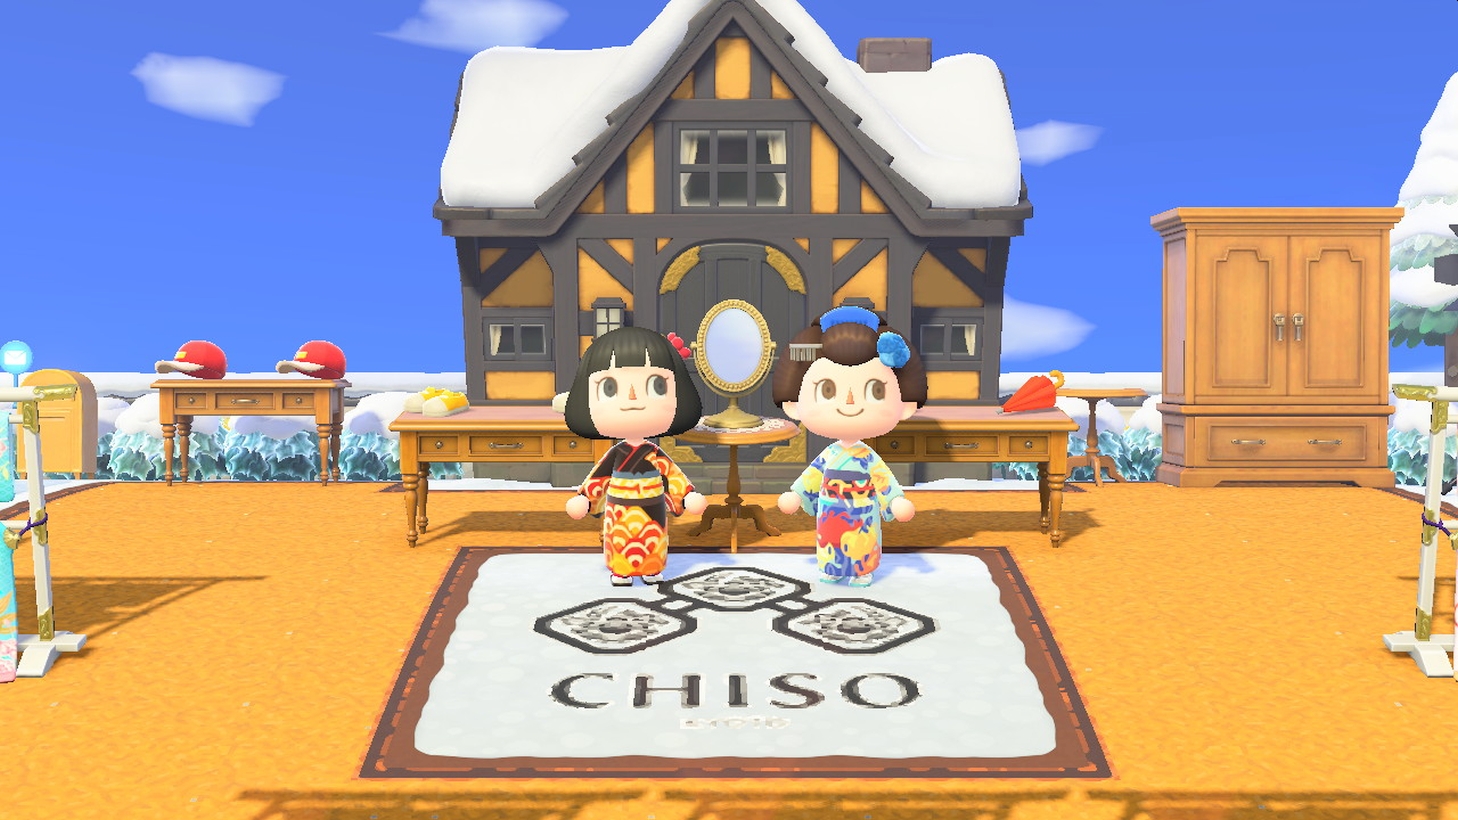 Kimono Designer Chiso Releases New Designs And Dream Island For Animal Crossing: New Horizons